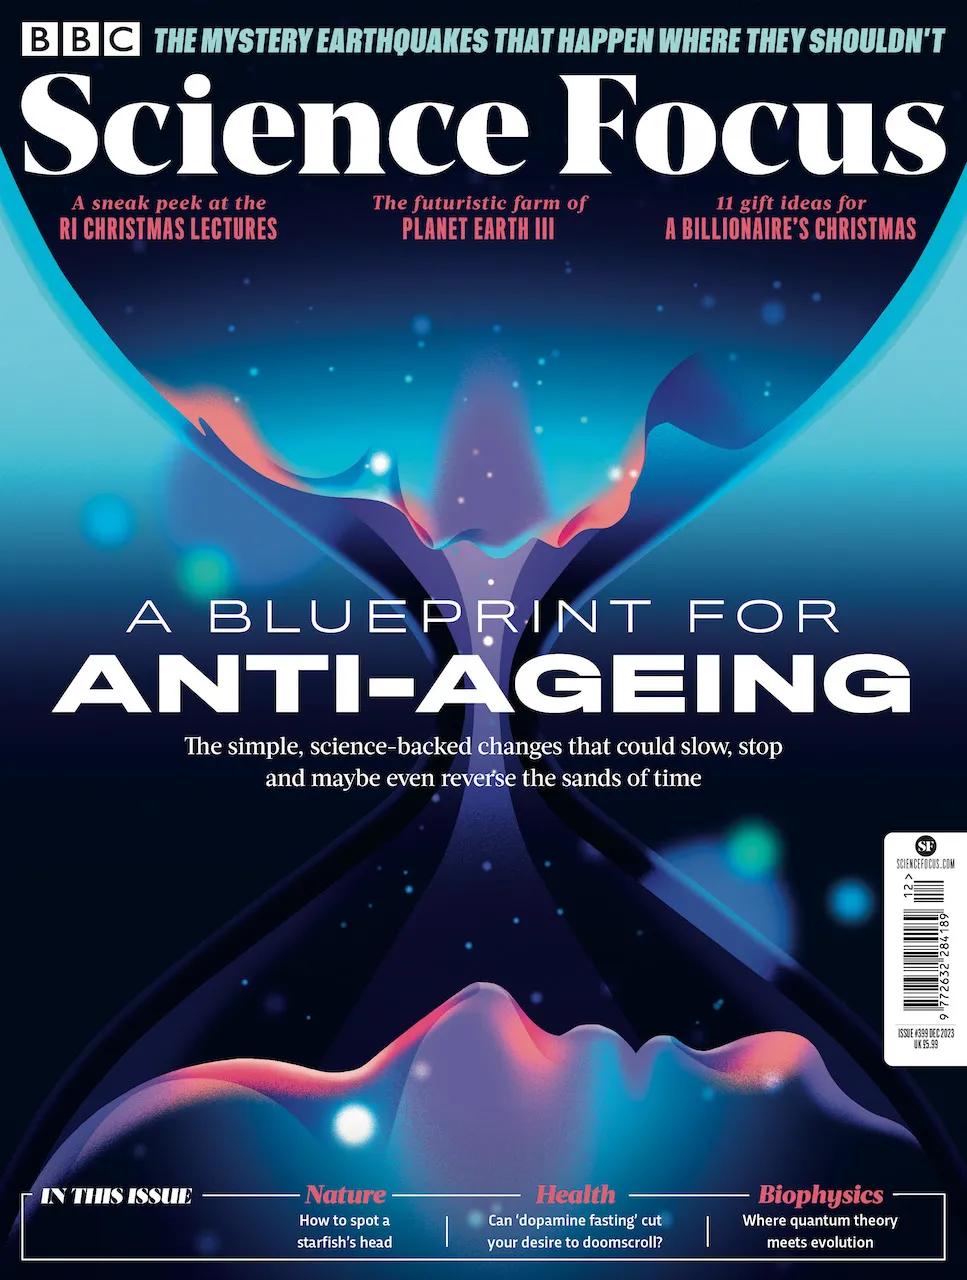 The cover of BBC Science Focus magazine, issue 399